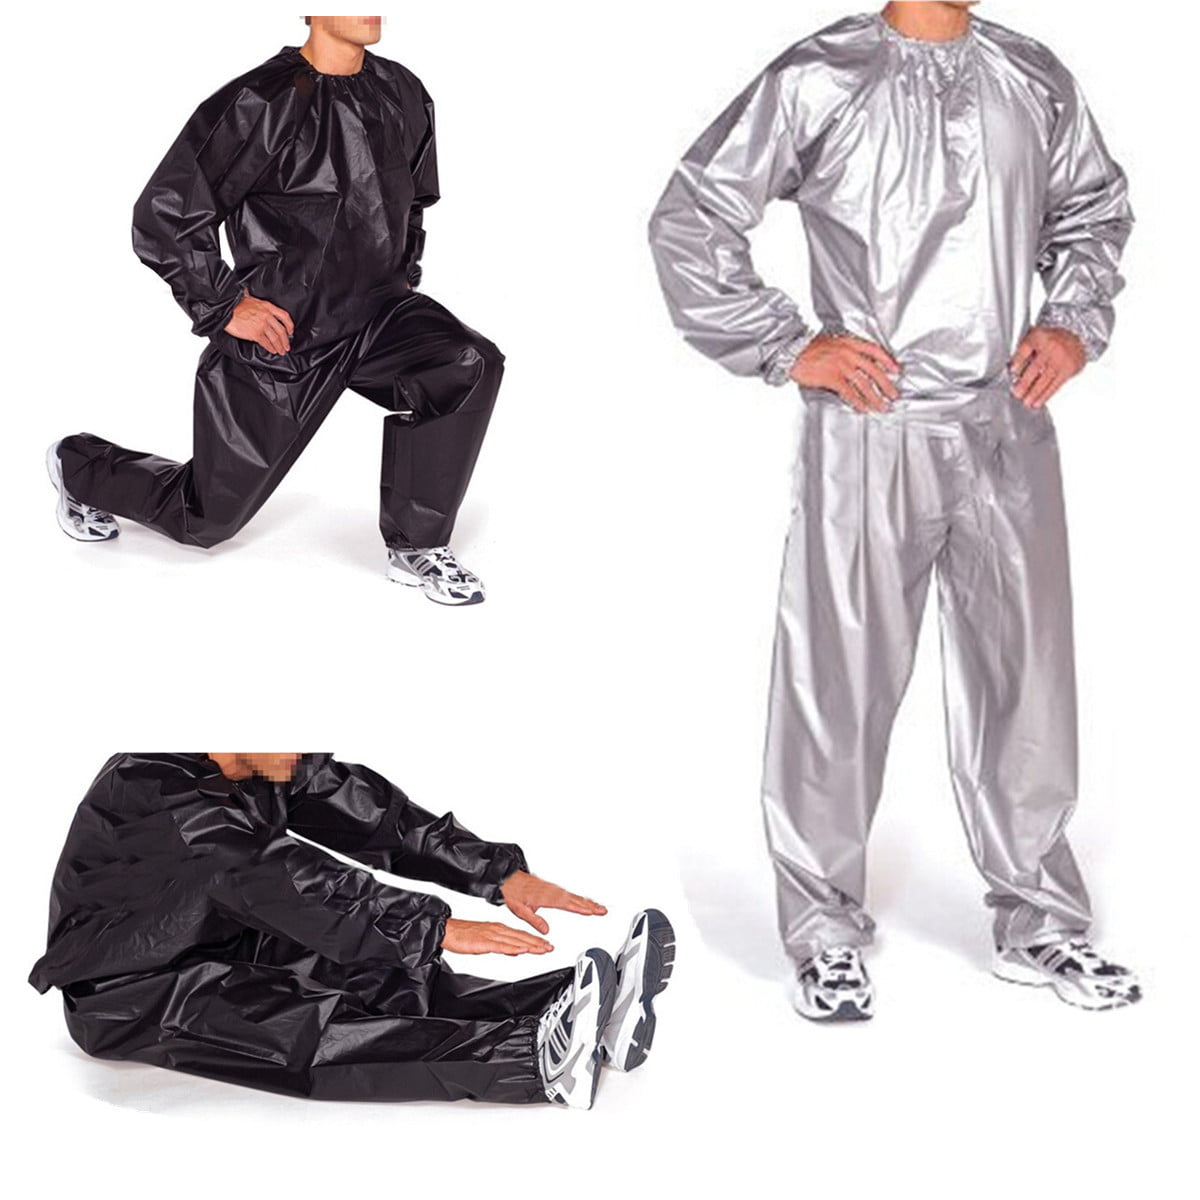 ARD Heavy Duty Sweat Suit Sauna Exercise Gym Suit Excersize Fitness Clothing 